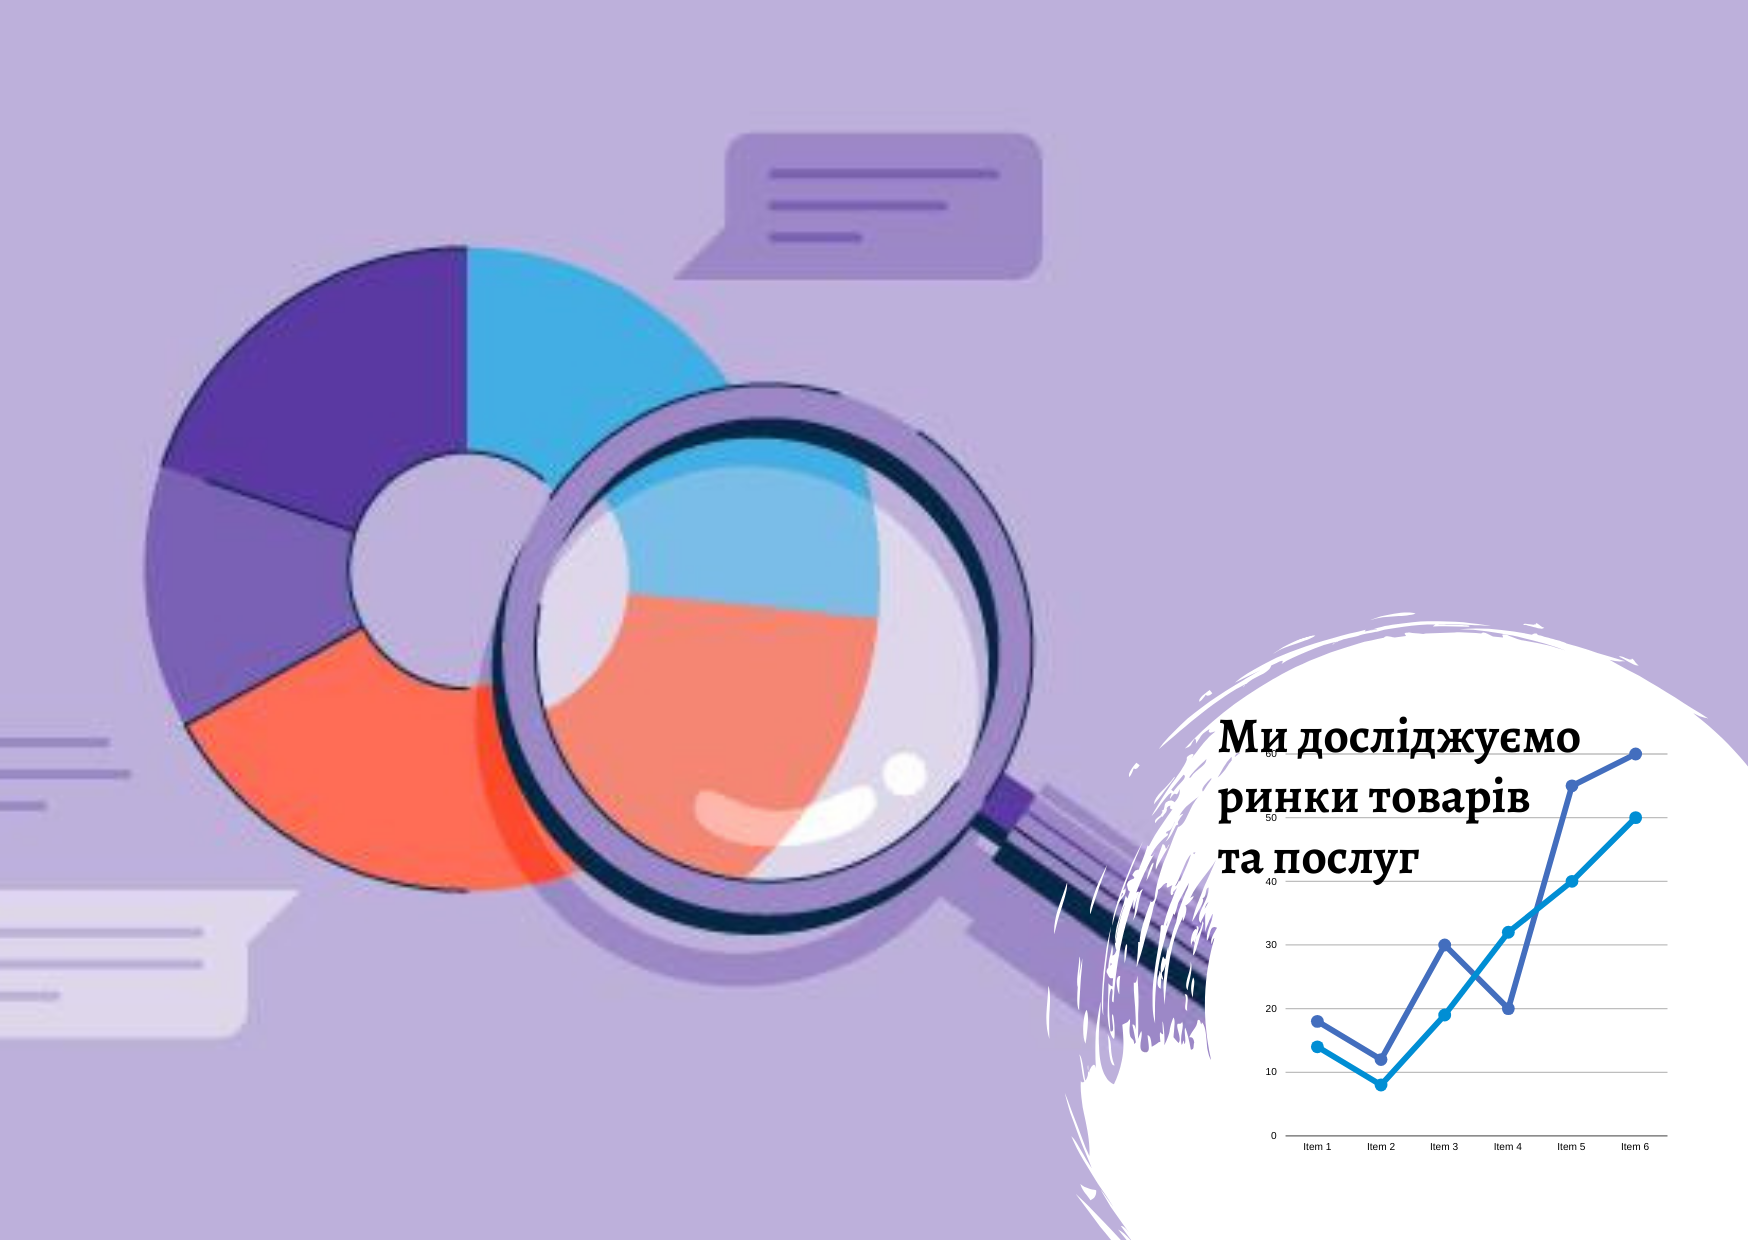 Product market analytics for Pro-Consulting customer